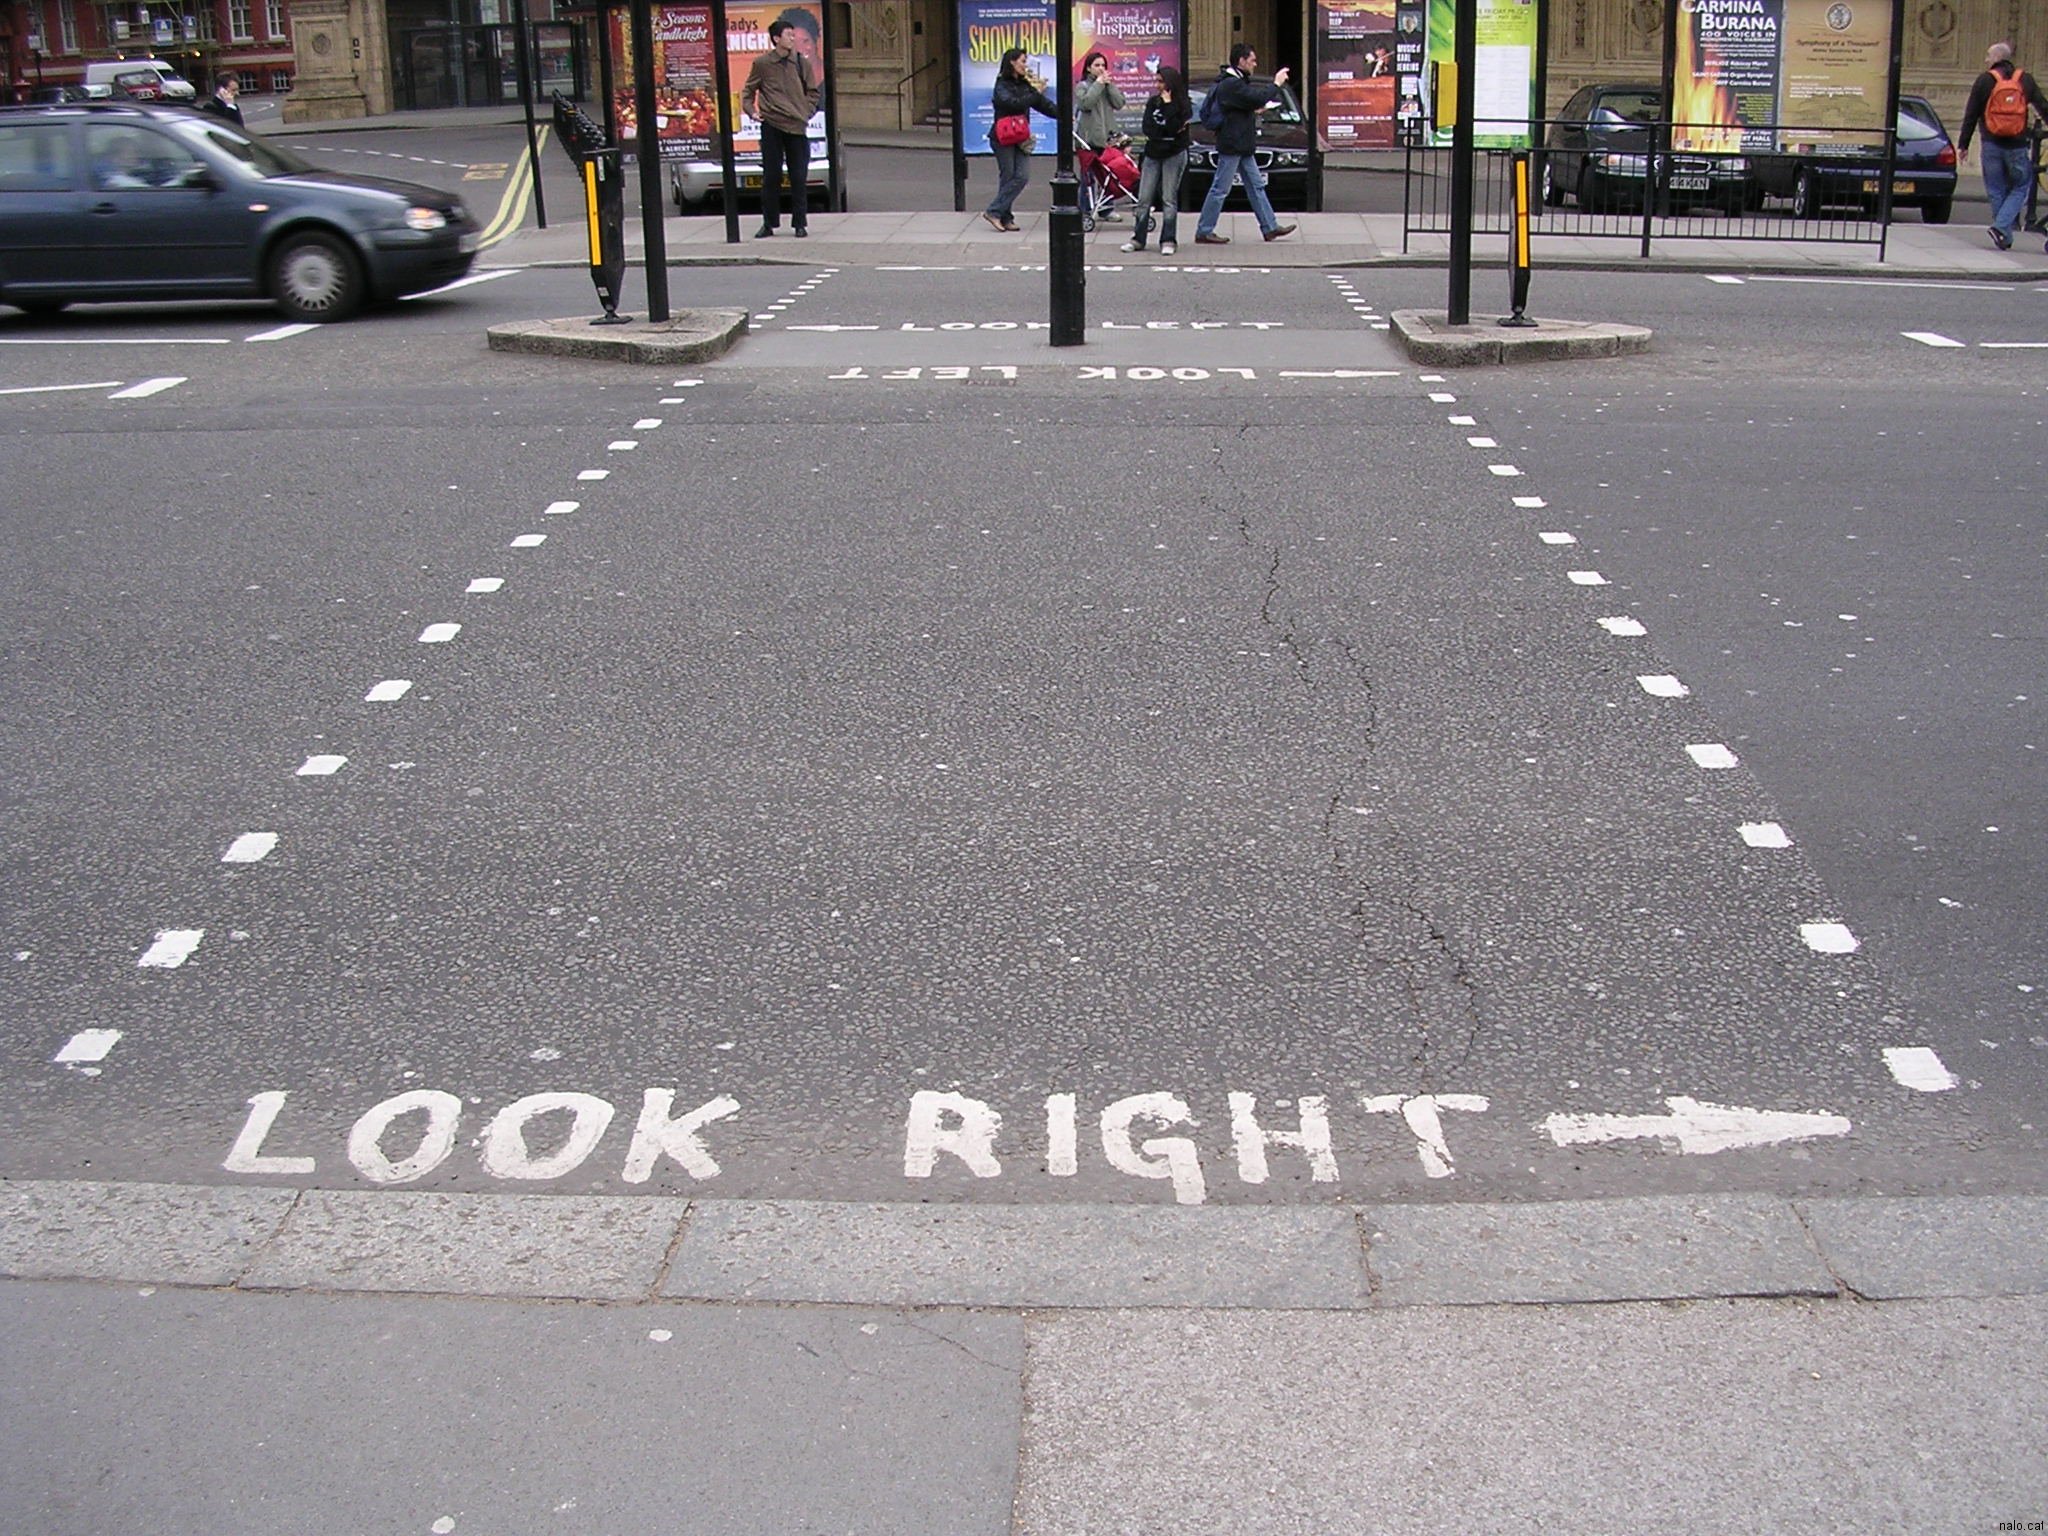 Look Right!